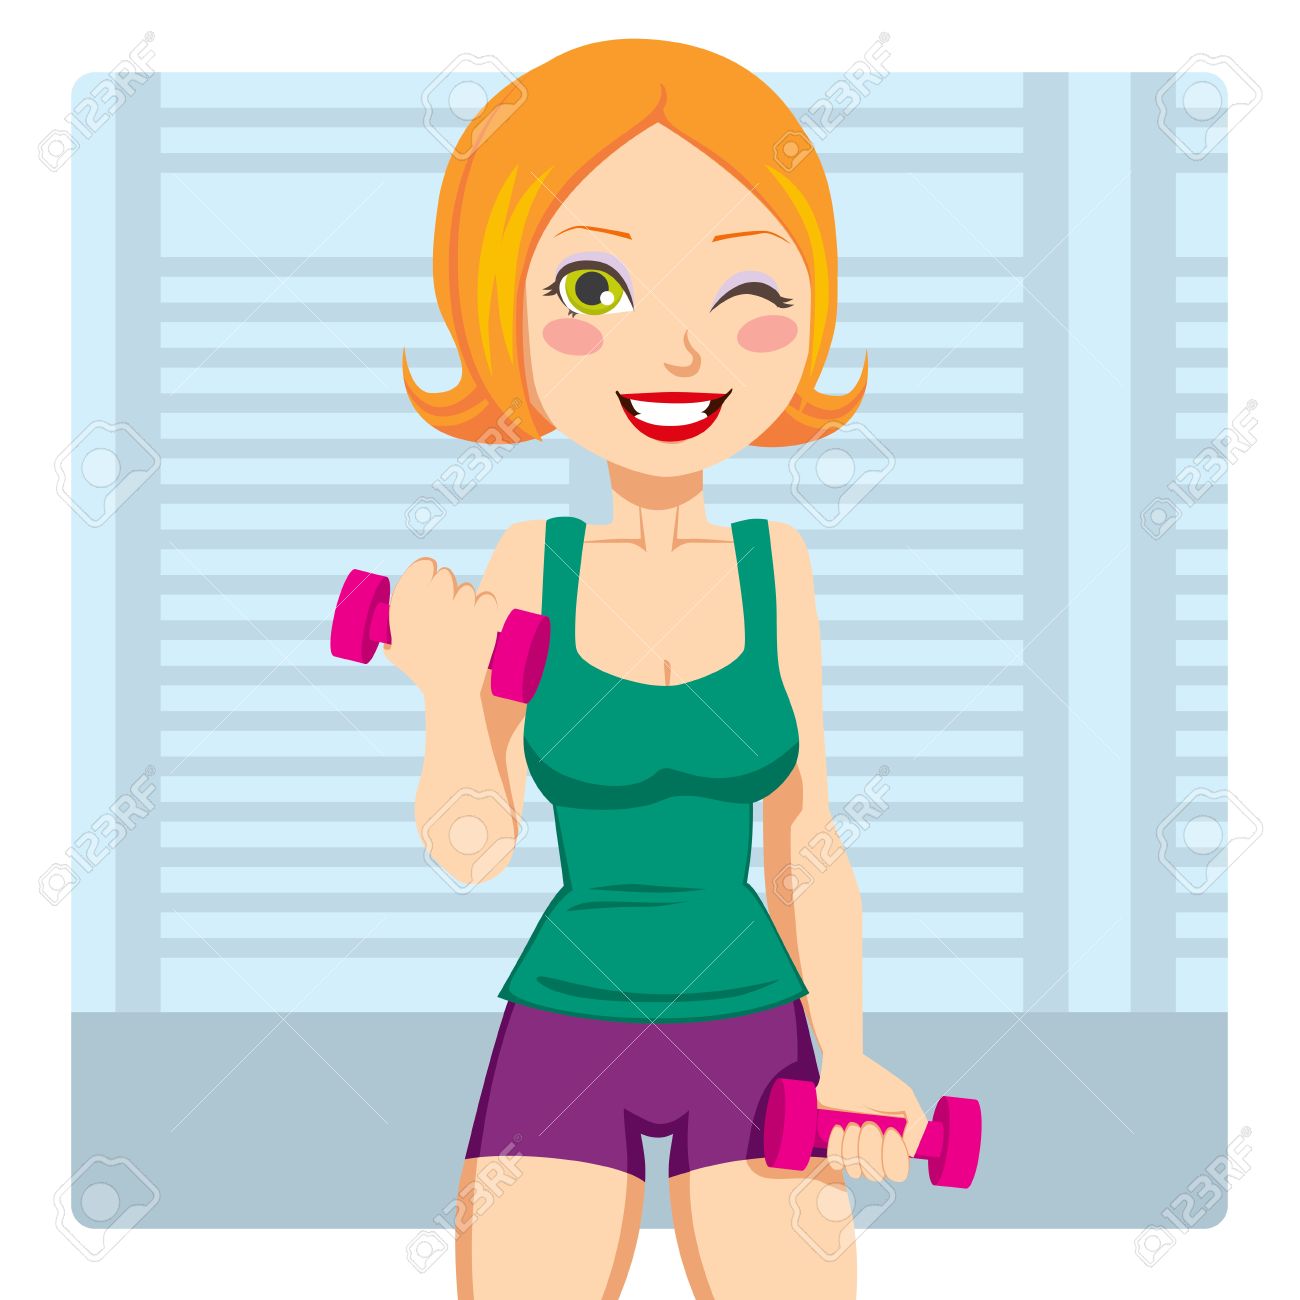 Free Girl Exercising Cliparts, Download Free Clip Art, Free.